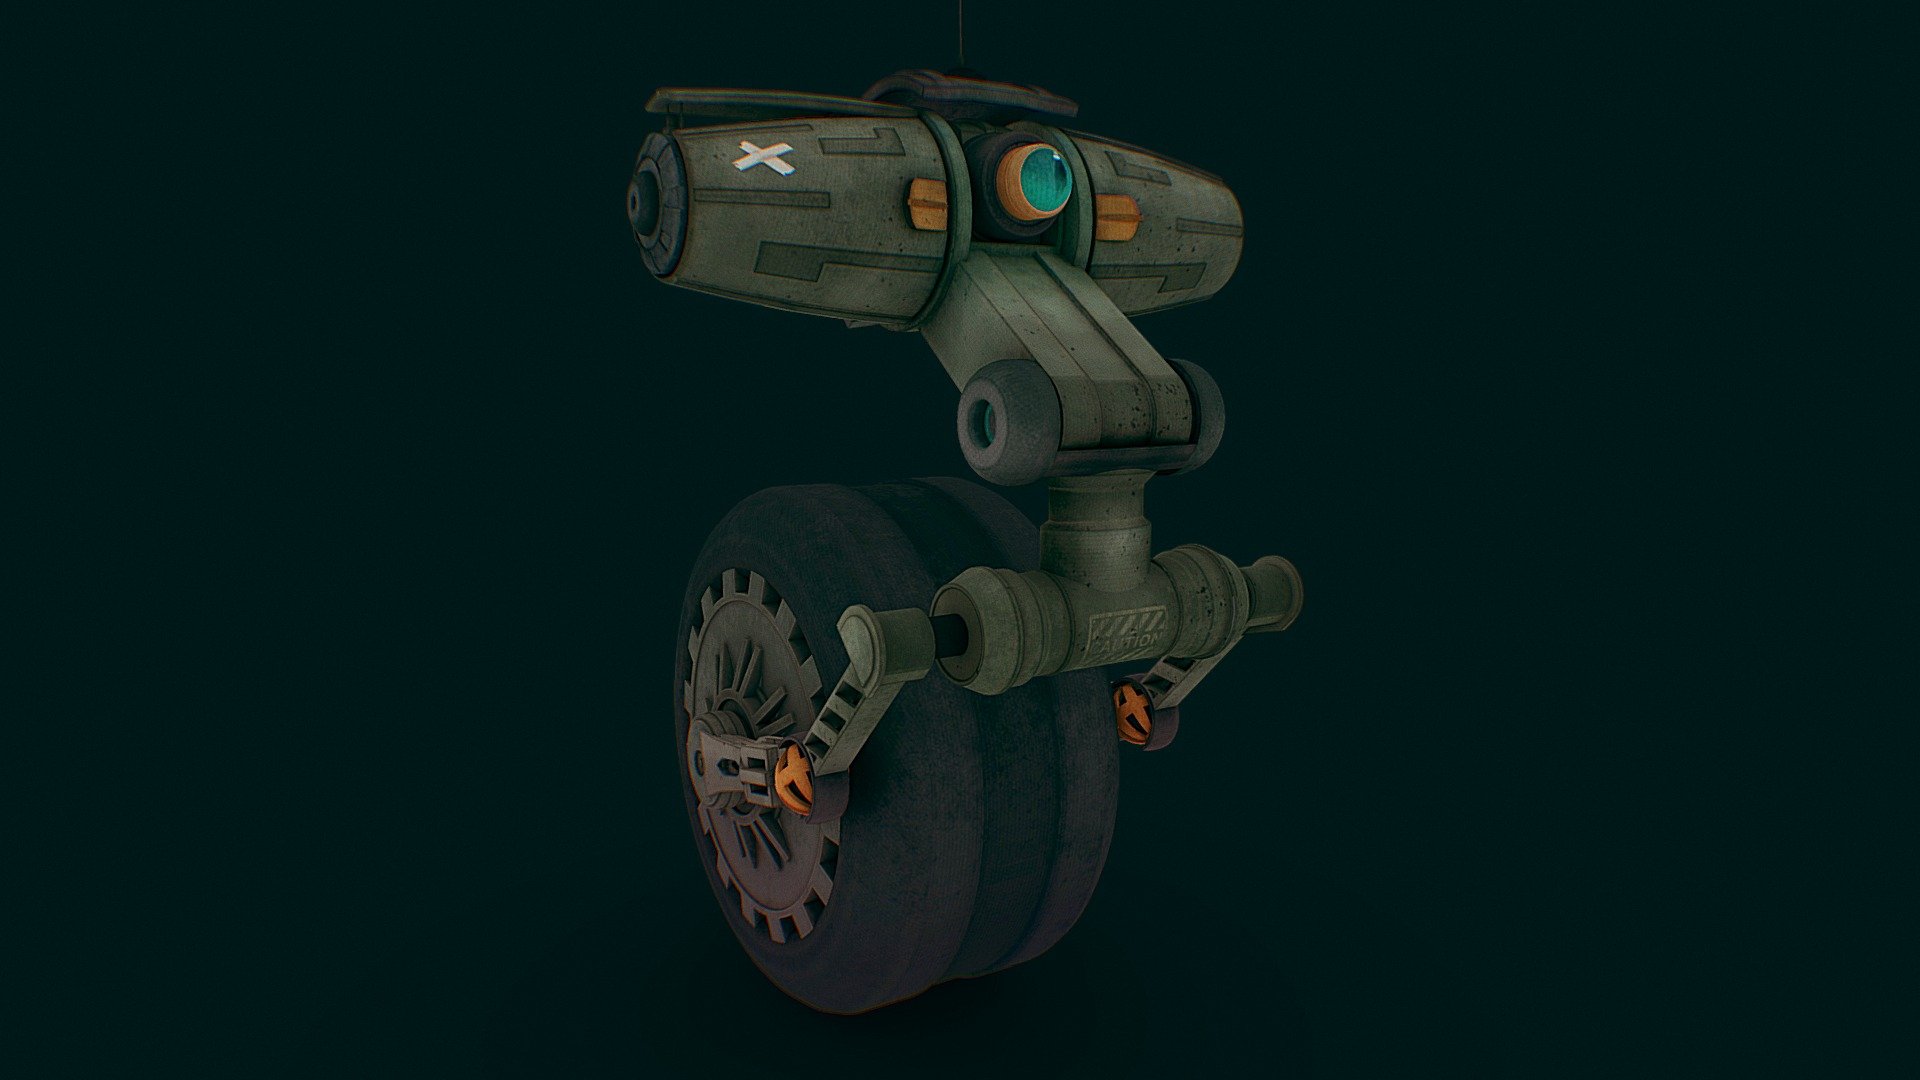 RD or ROD is a repair droid who will repair any damaged ship.
I wanted to give it a hand painted look by using procedural textures. Highly influenced by borderlands style.

Based on &ldquo;Riding Robot